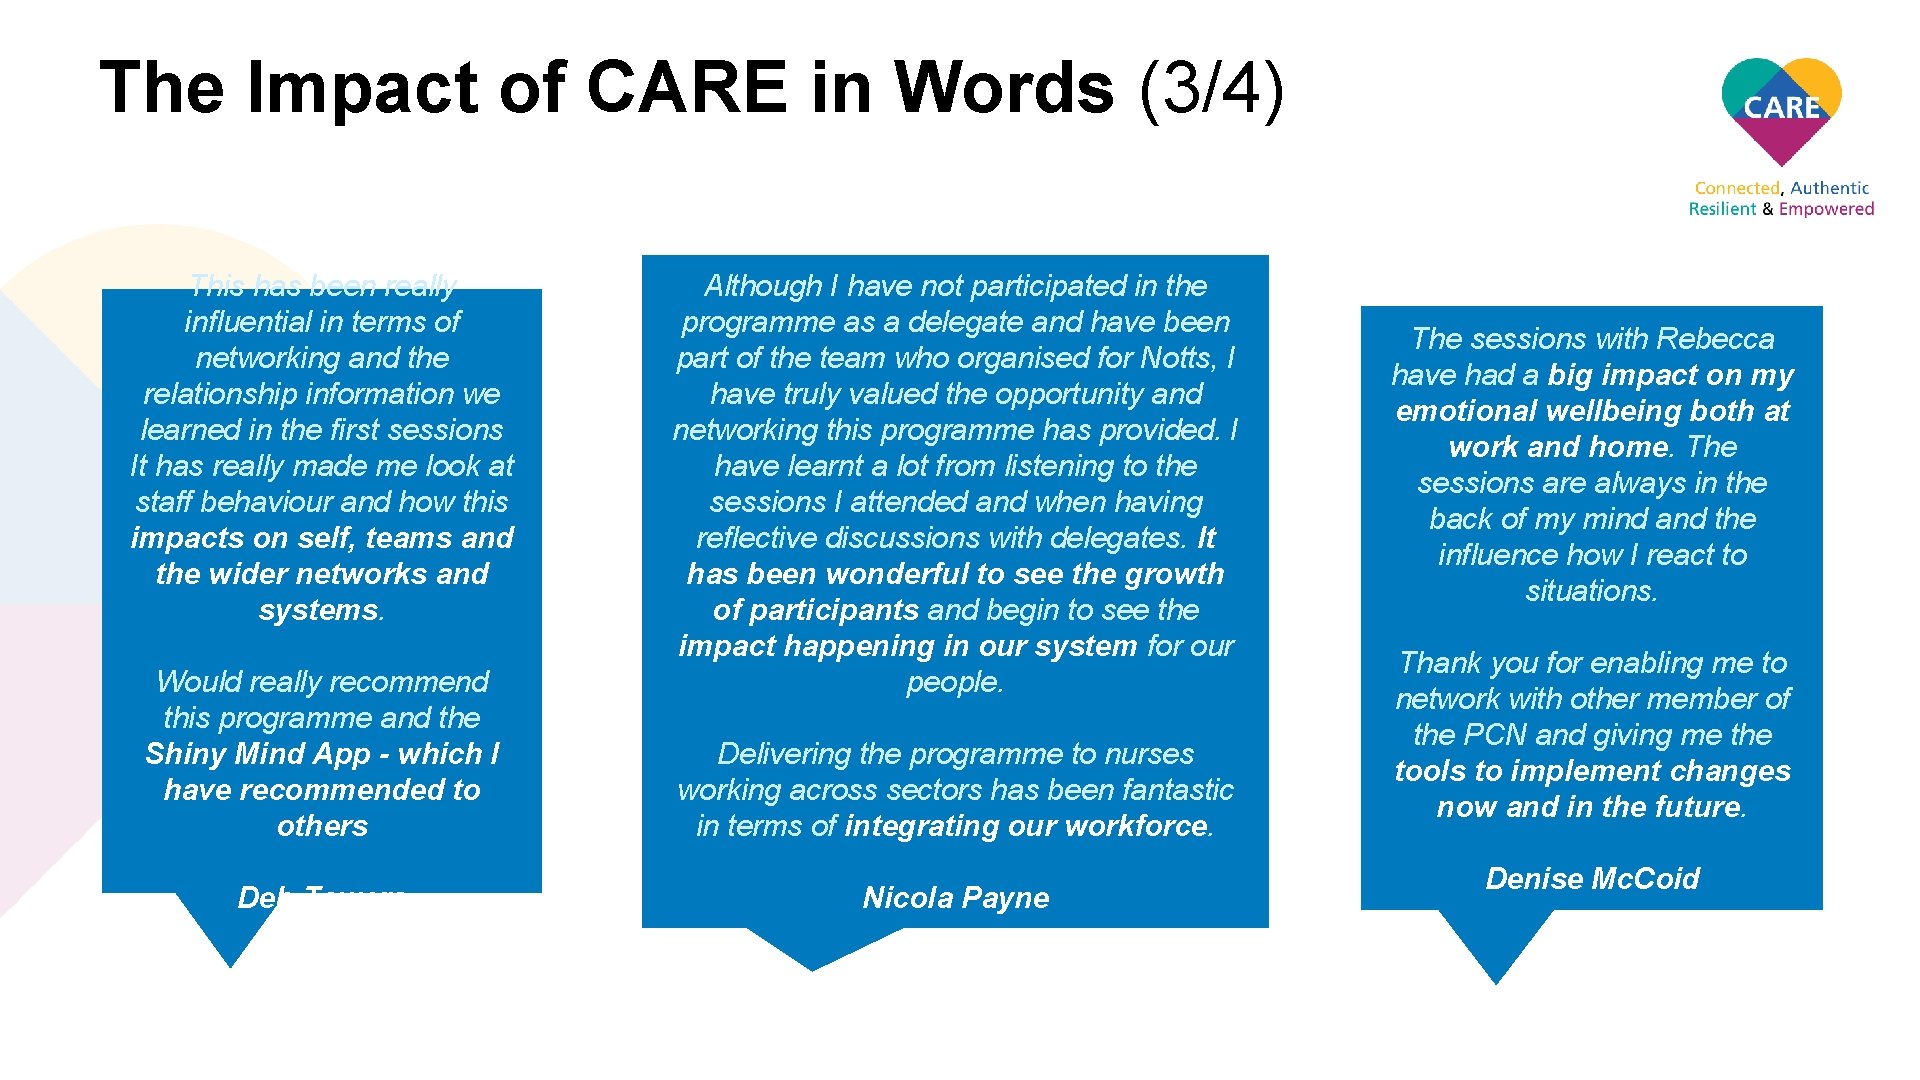 The Impact of CARE in Words (3/4) This has been really influential in terms